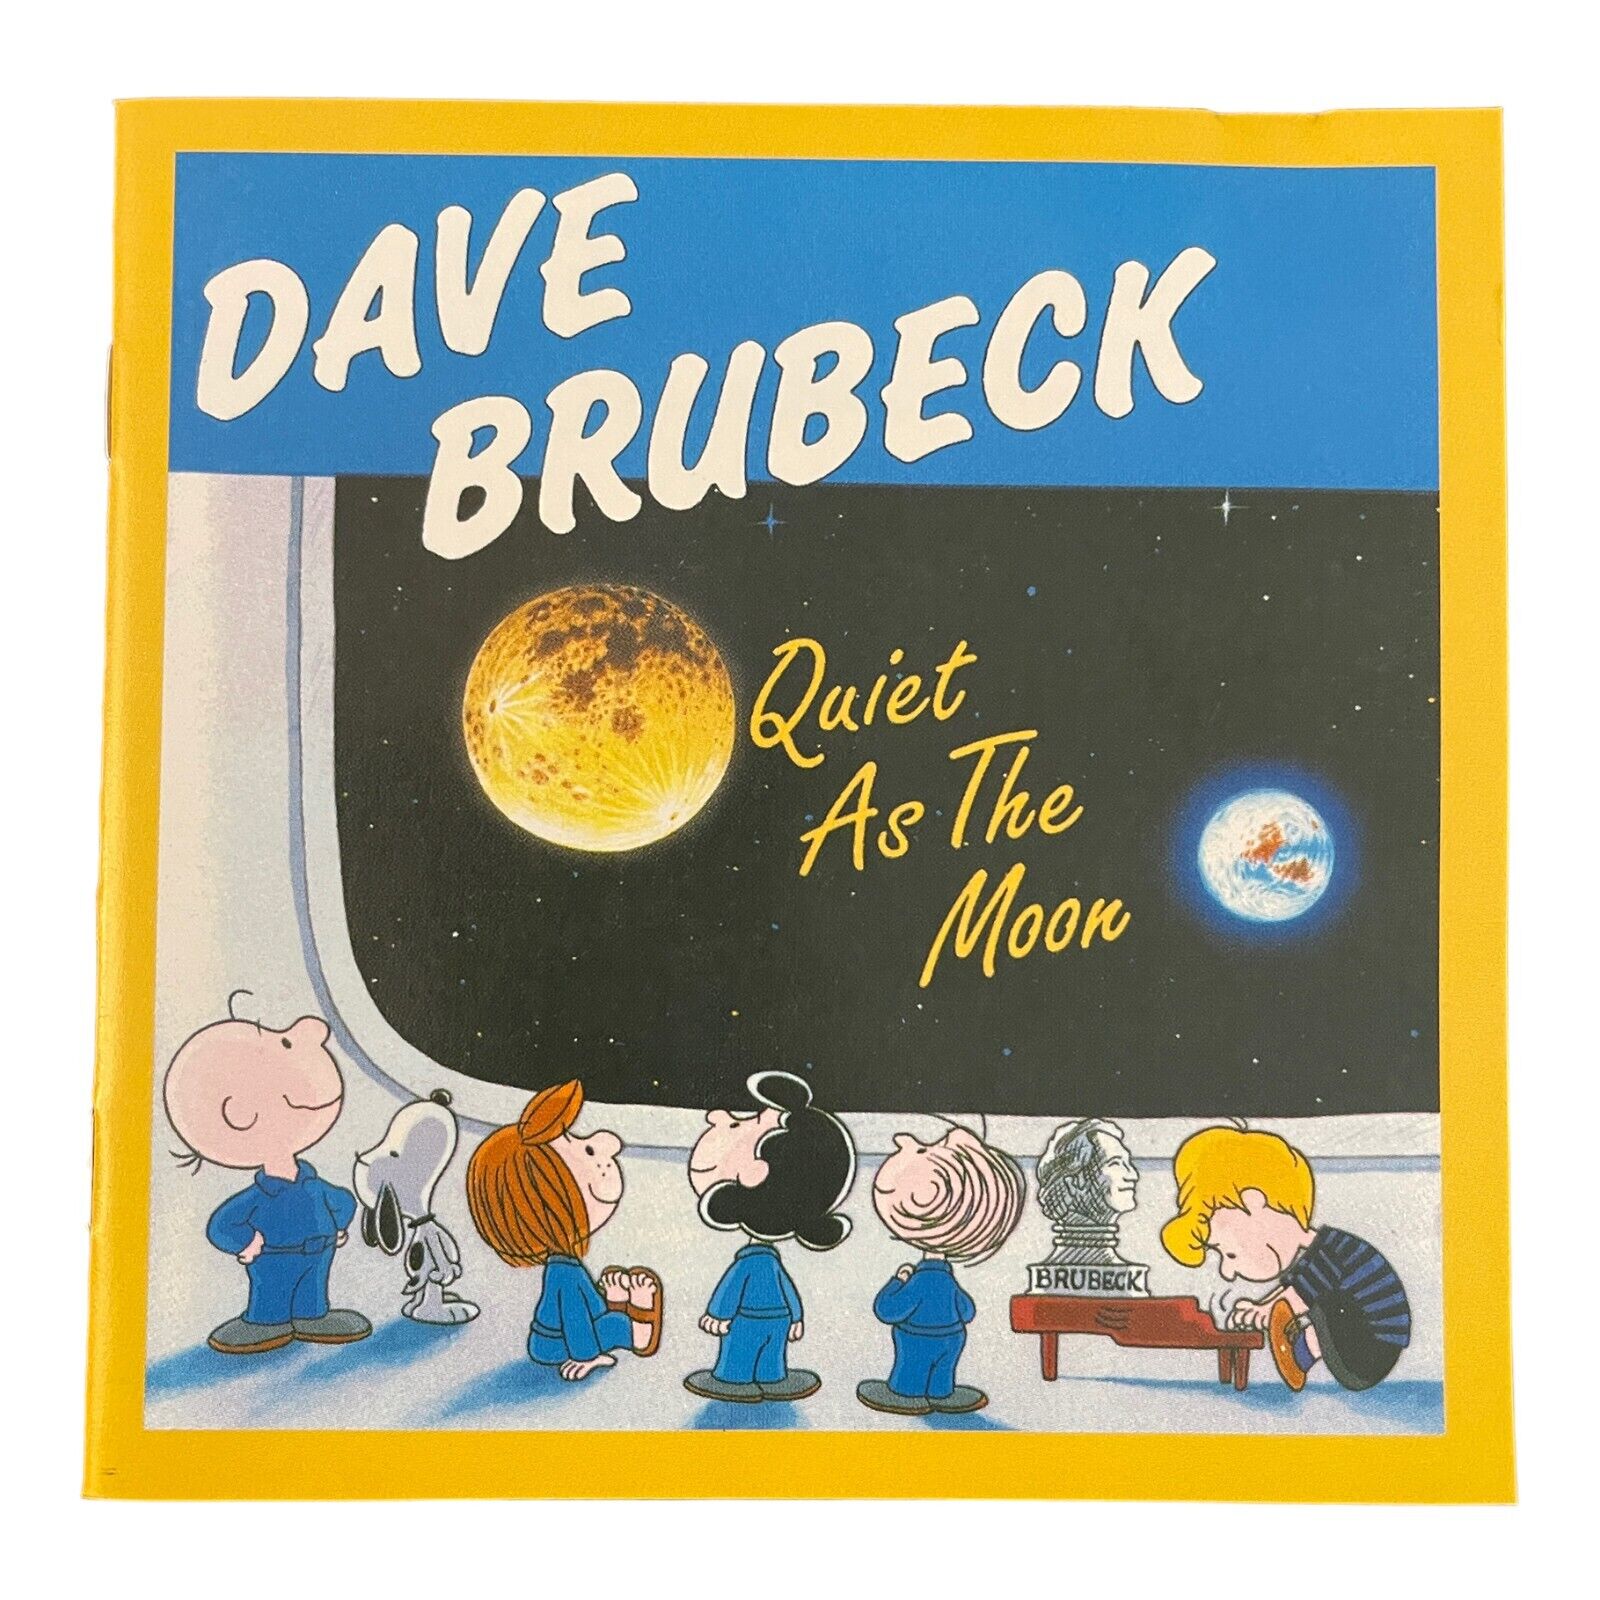 Quiet As The Moon - Dave Brubeck - 1999 CD - Peanuts Charlie Brown